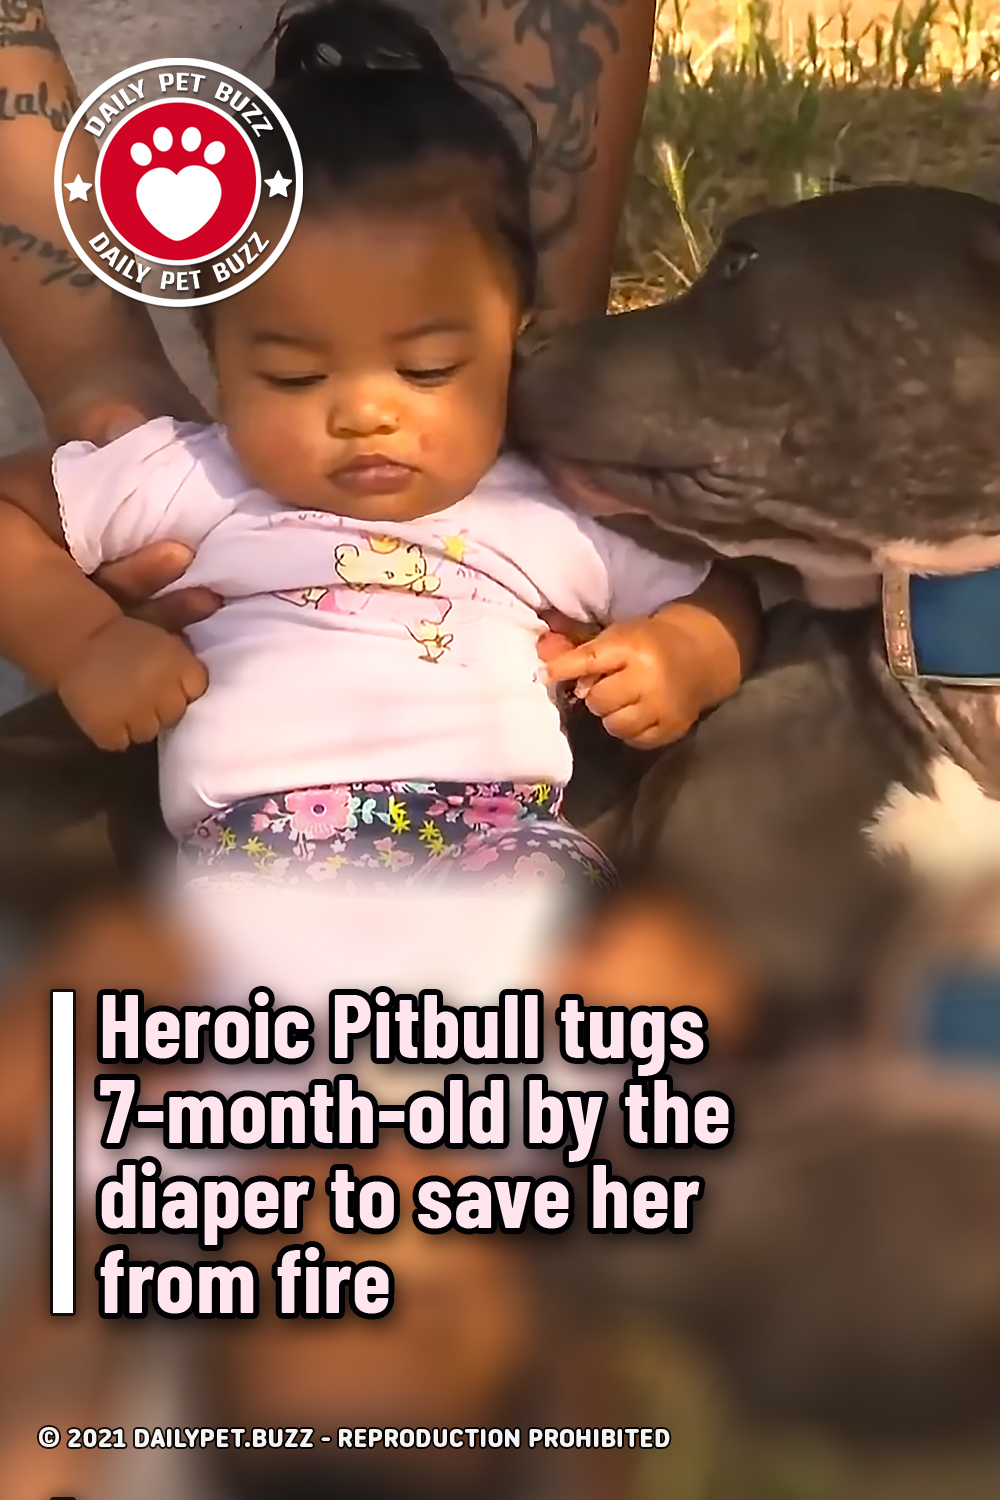 Heroic Pitbull tugs 7-month-old by the diaper to save her from fire